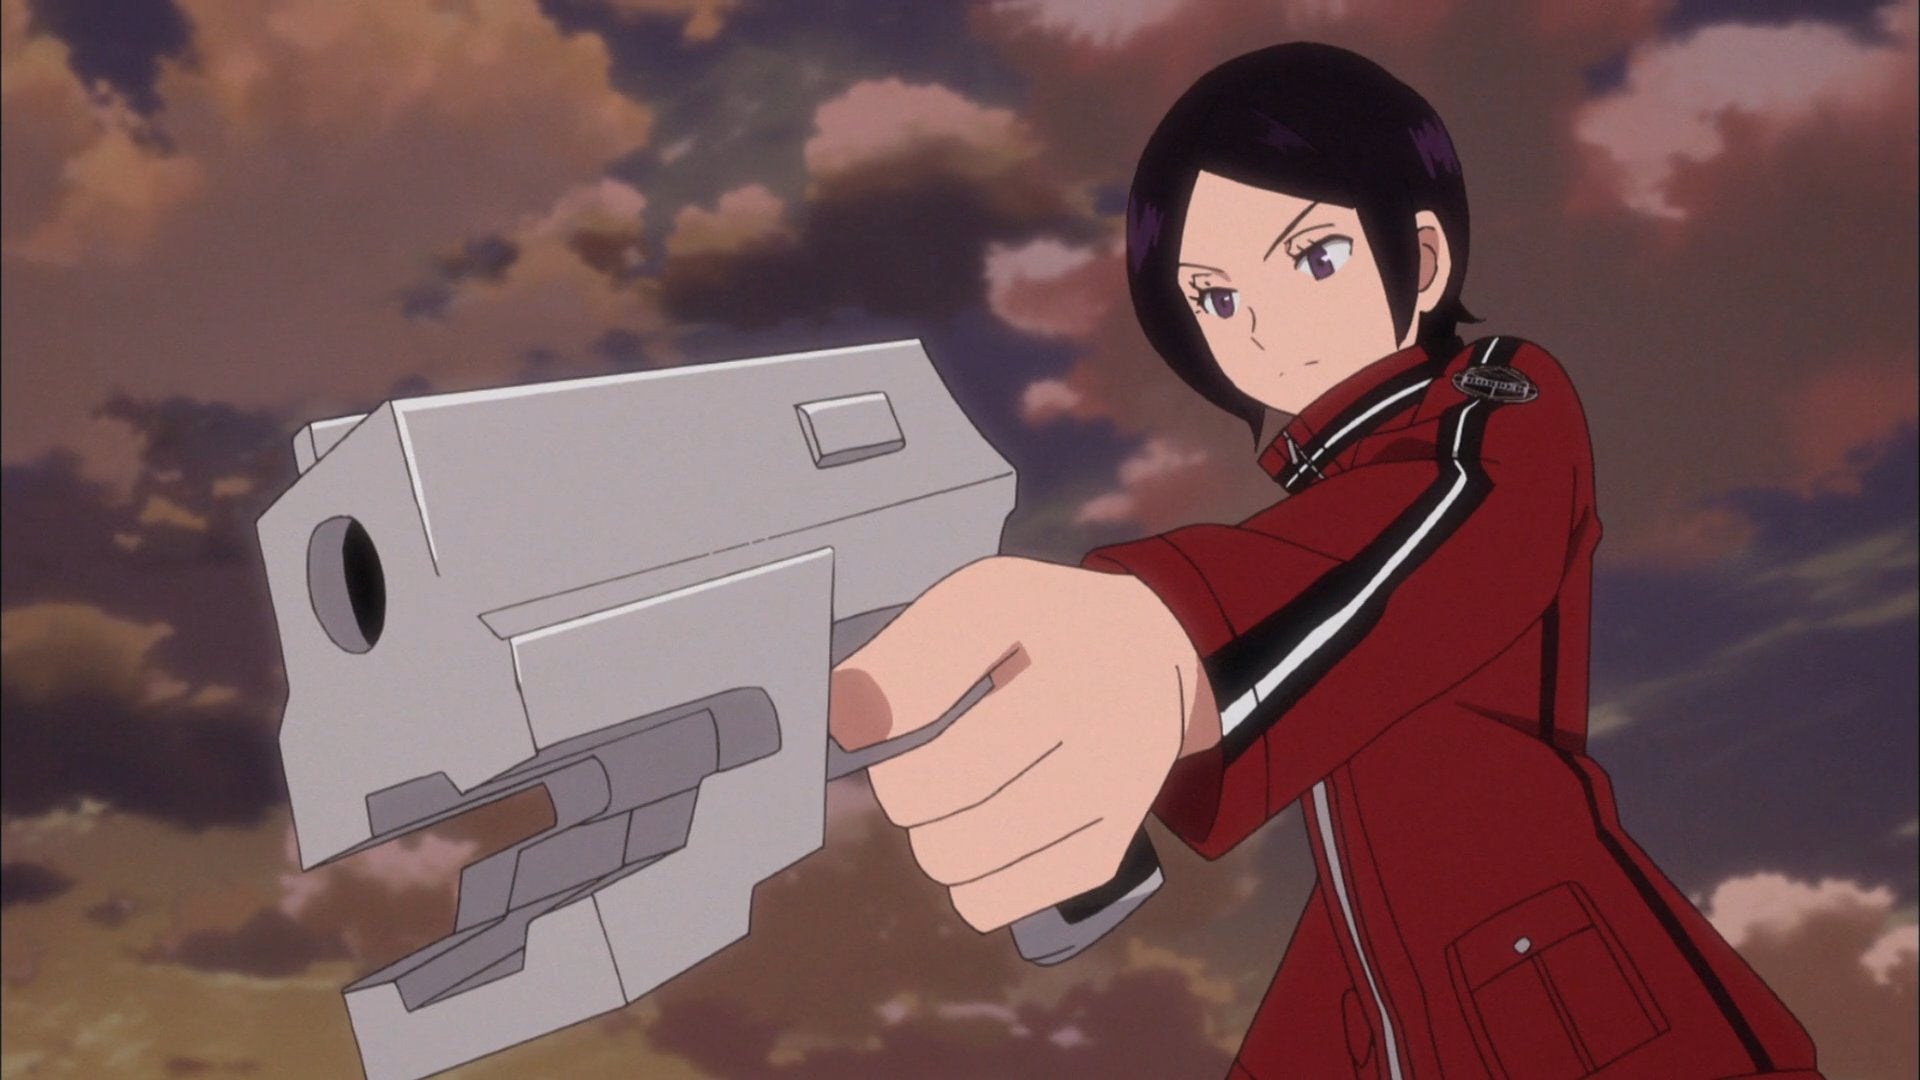 World Trigger: Yuichi Jin  Anime films, Cool anime pictures